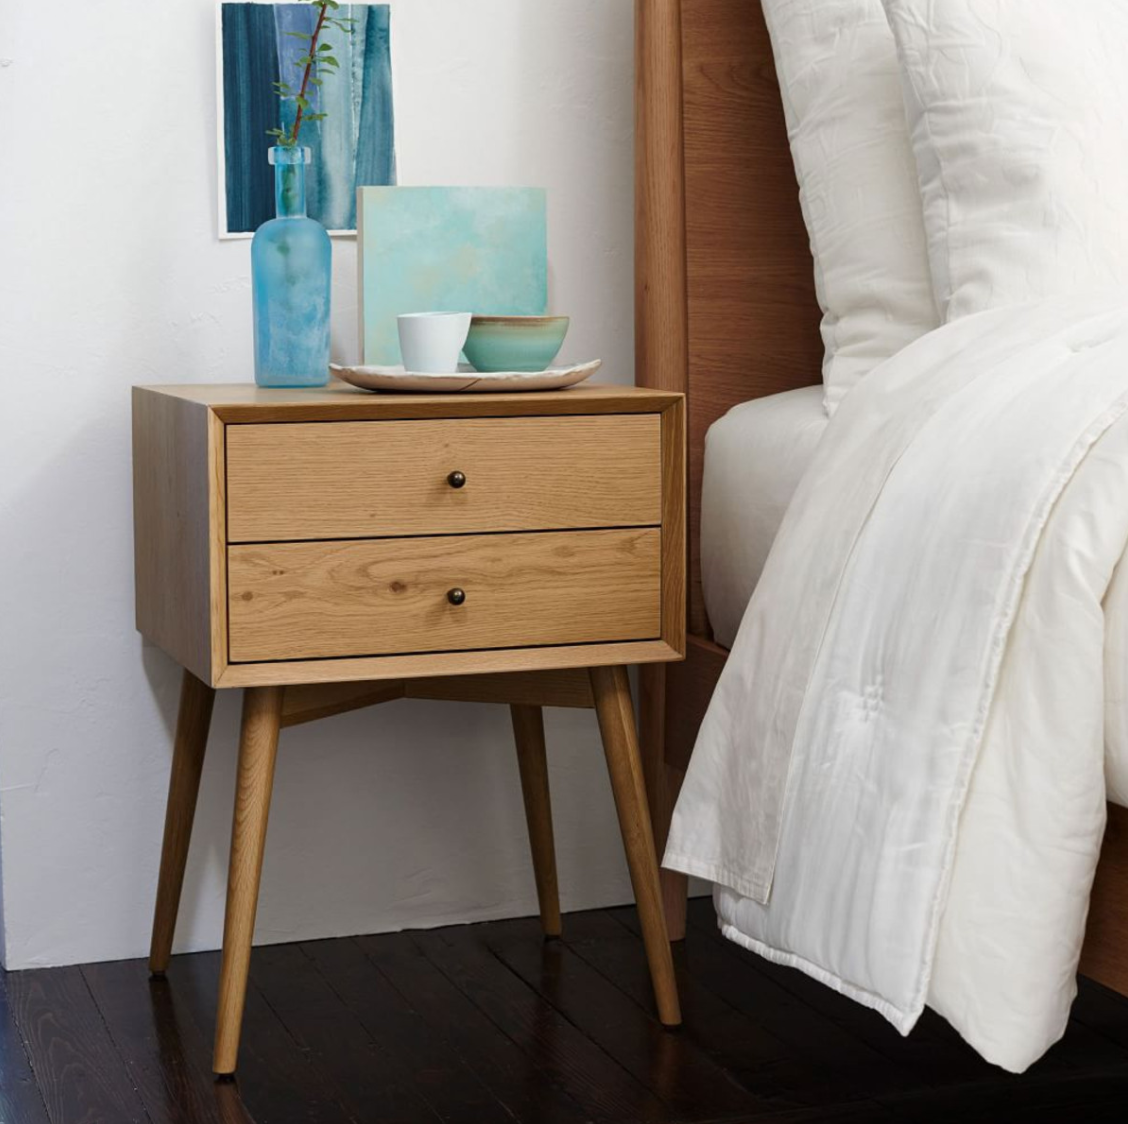 Bedside table from West Elm